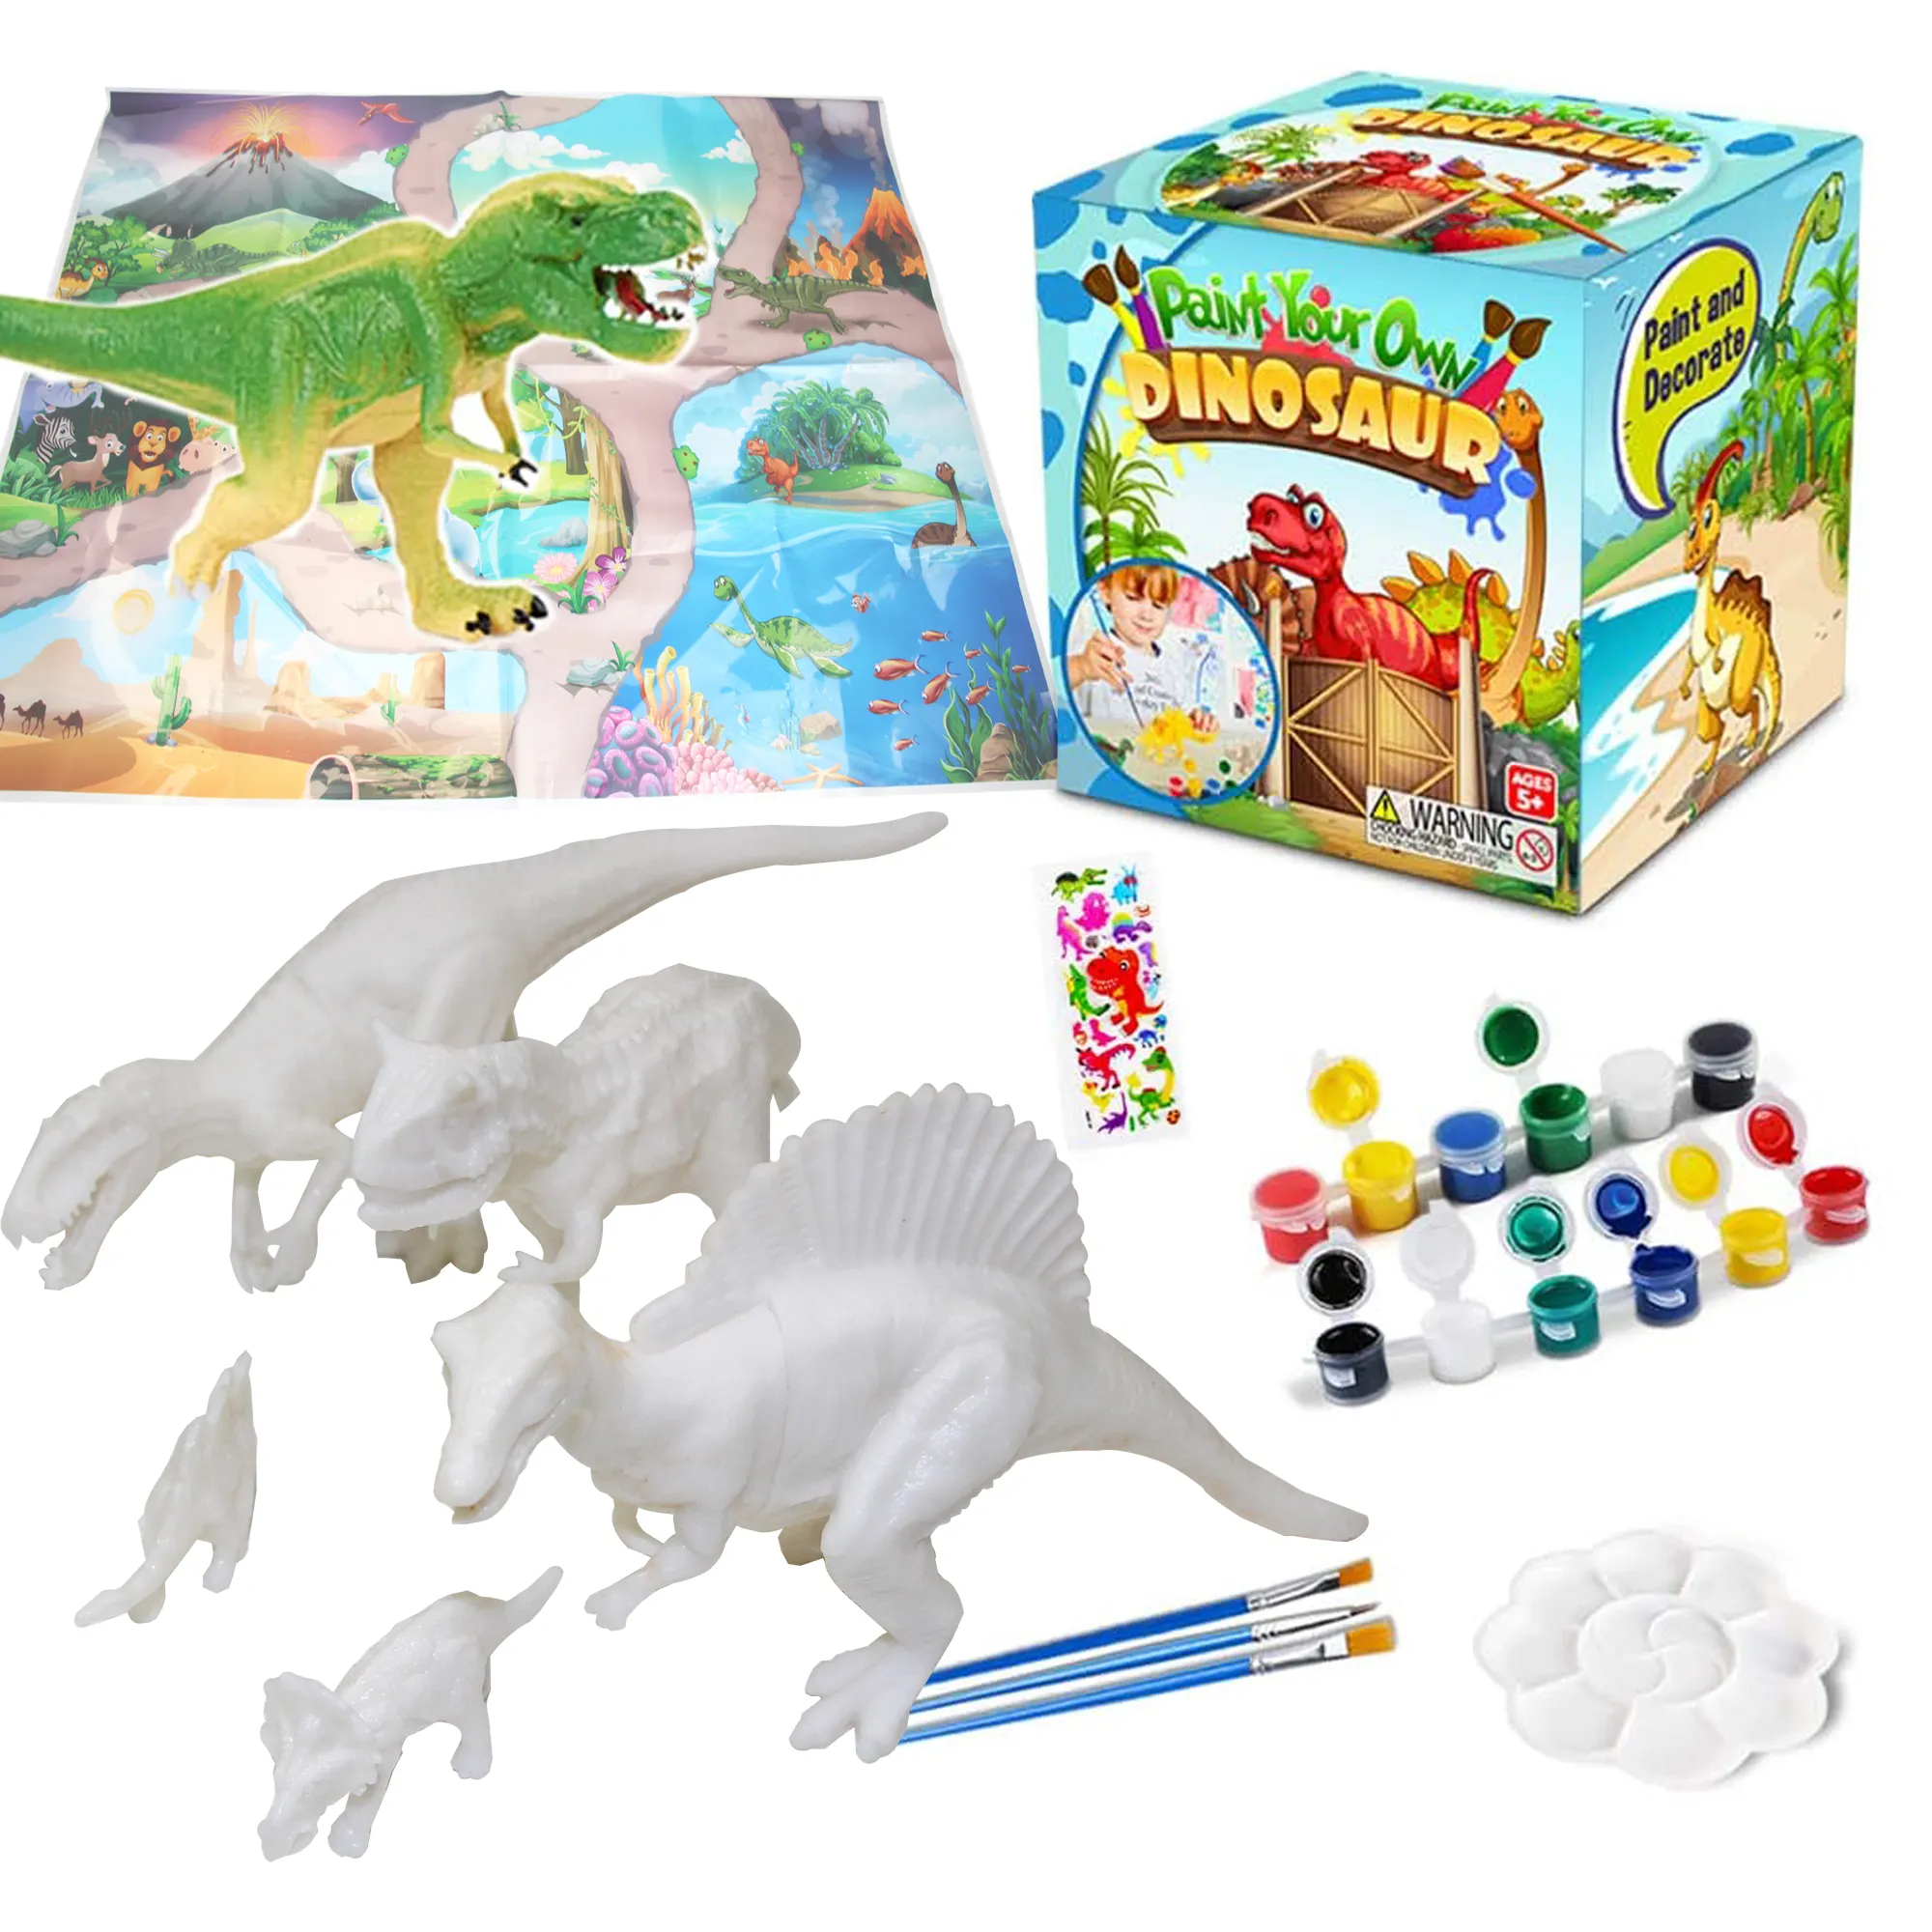 DIY Gift Easter Paint Your Own Dinosaur Animal Set Crafts and Arts Set Painting Kit Dinosaurs Toys